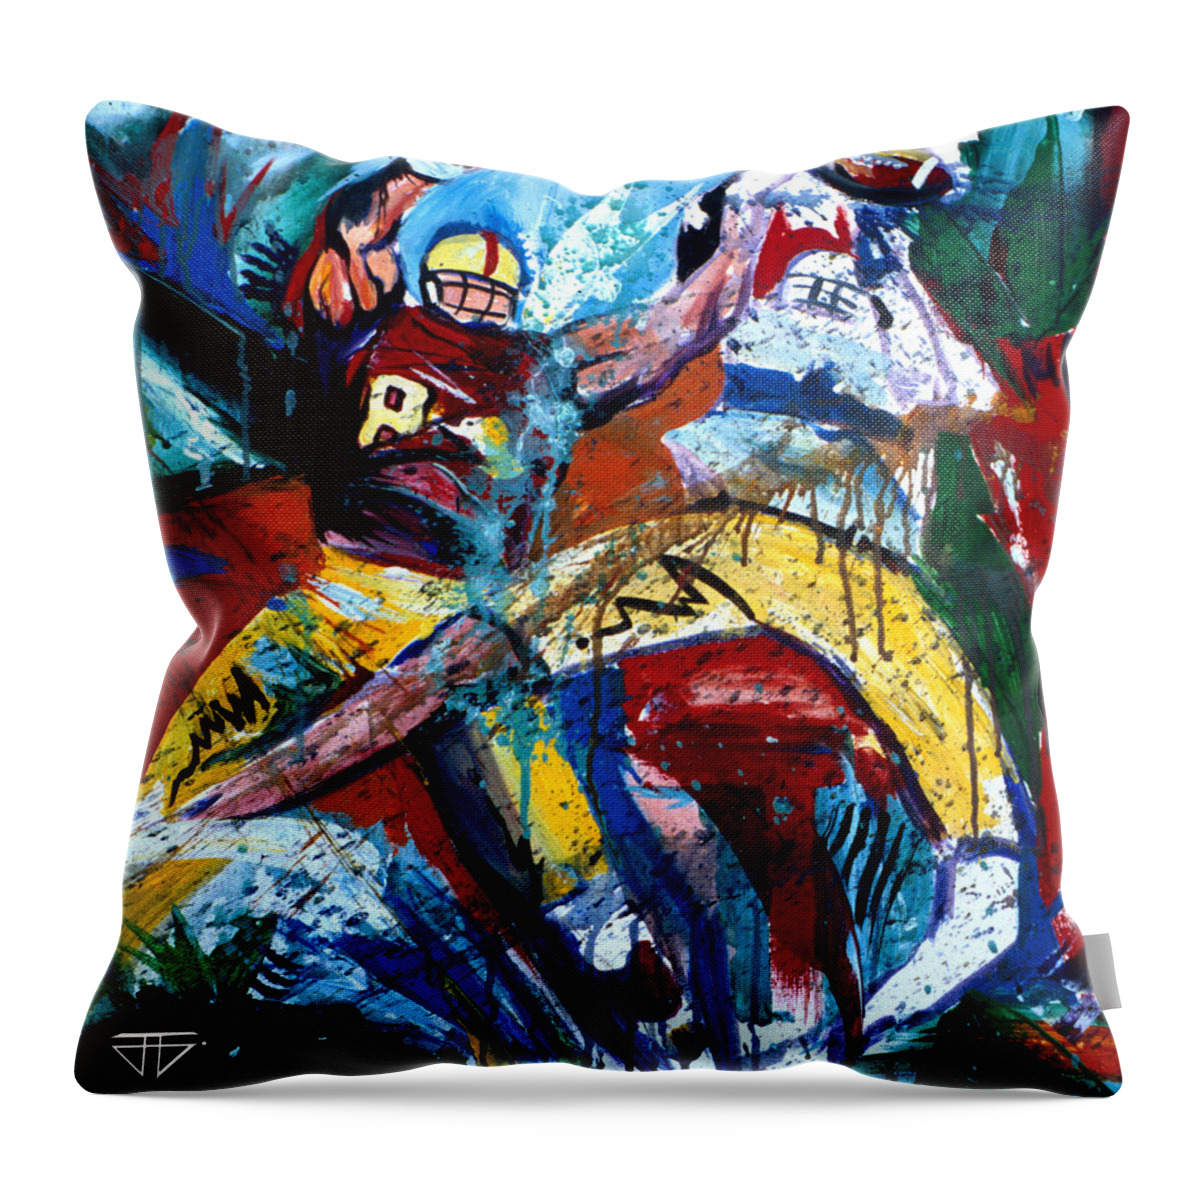  Throw Pillow featuring the painting The Catch by John Gholson